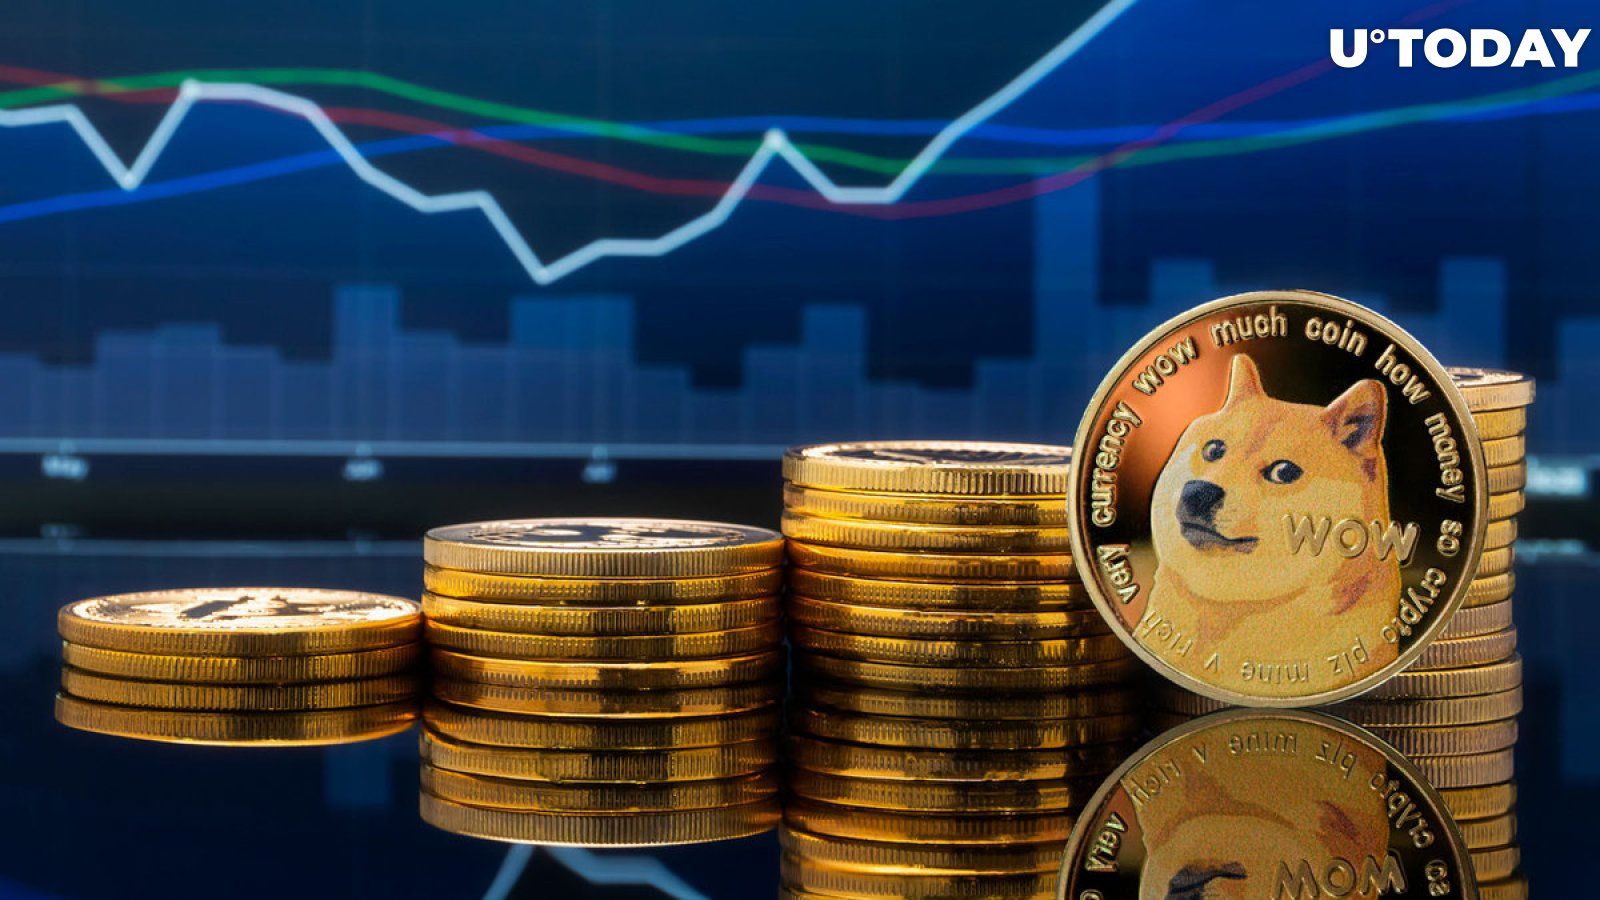 When Dogecoin Hits $1.69, Everyone Will Be Scared, Says Dogecoin Founder